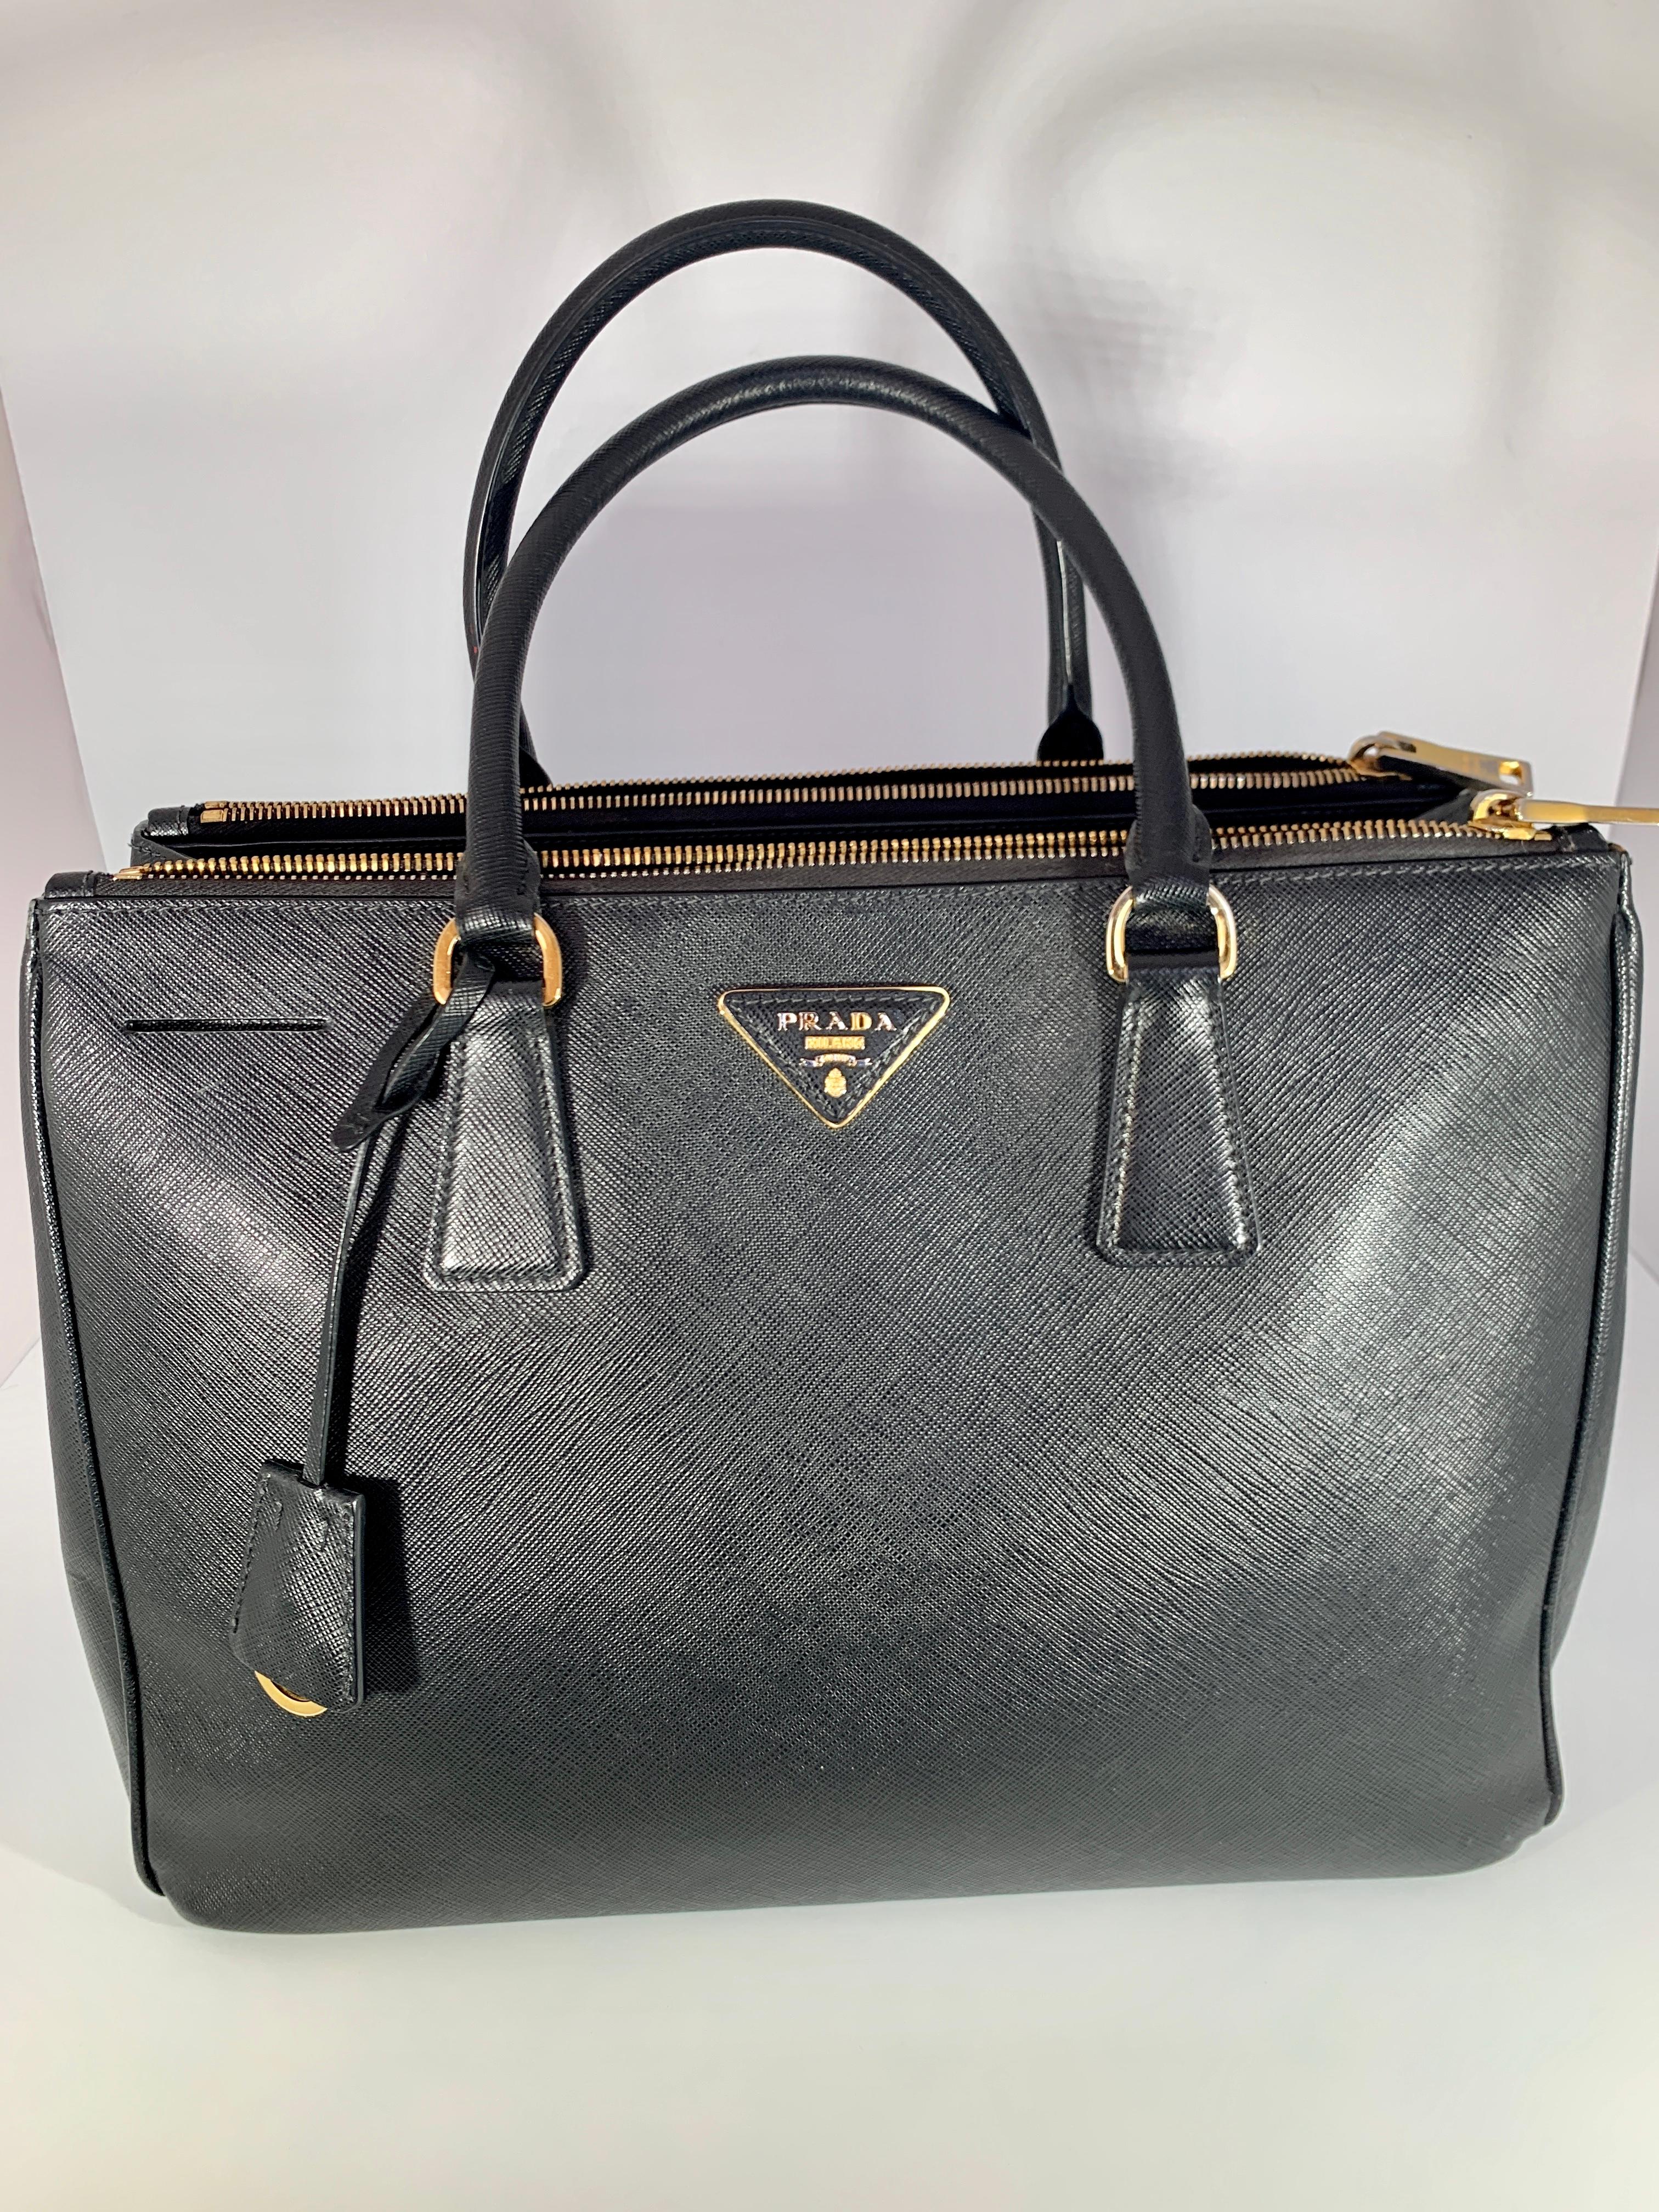 Prada Saffiano Lux Double-Zip Tote Bag, Black
Boxy saffiano leather top handle bag with polished hardware and a removable crossbody strap. Double top handles Removable, adjustable shoulder strap Side-snap gussets Open top Goldtone hardware Two